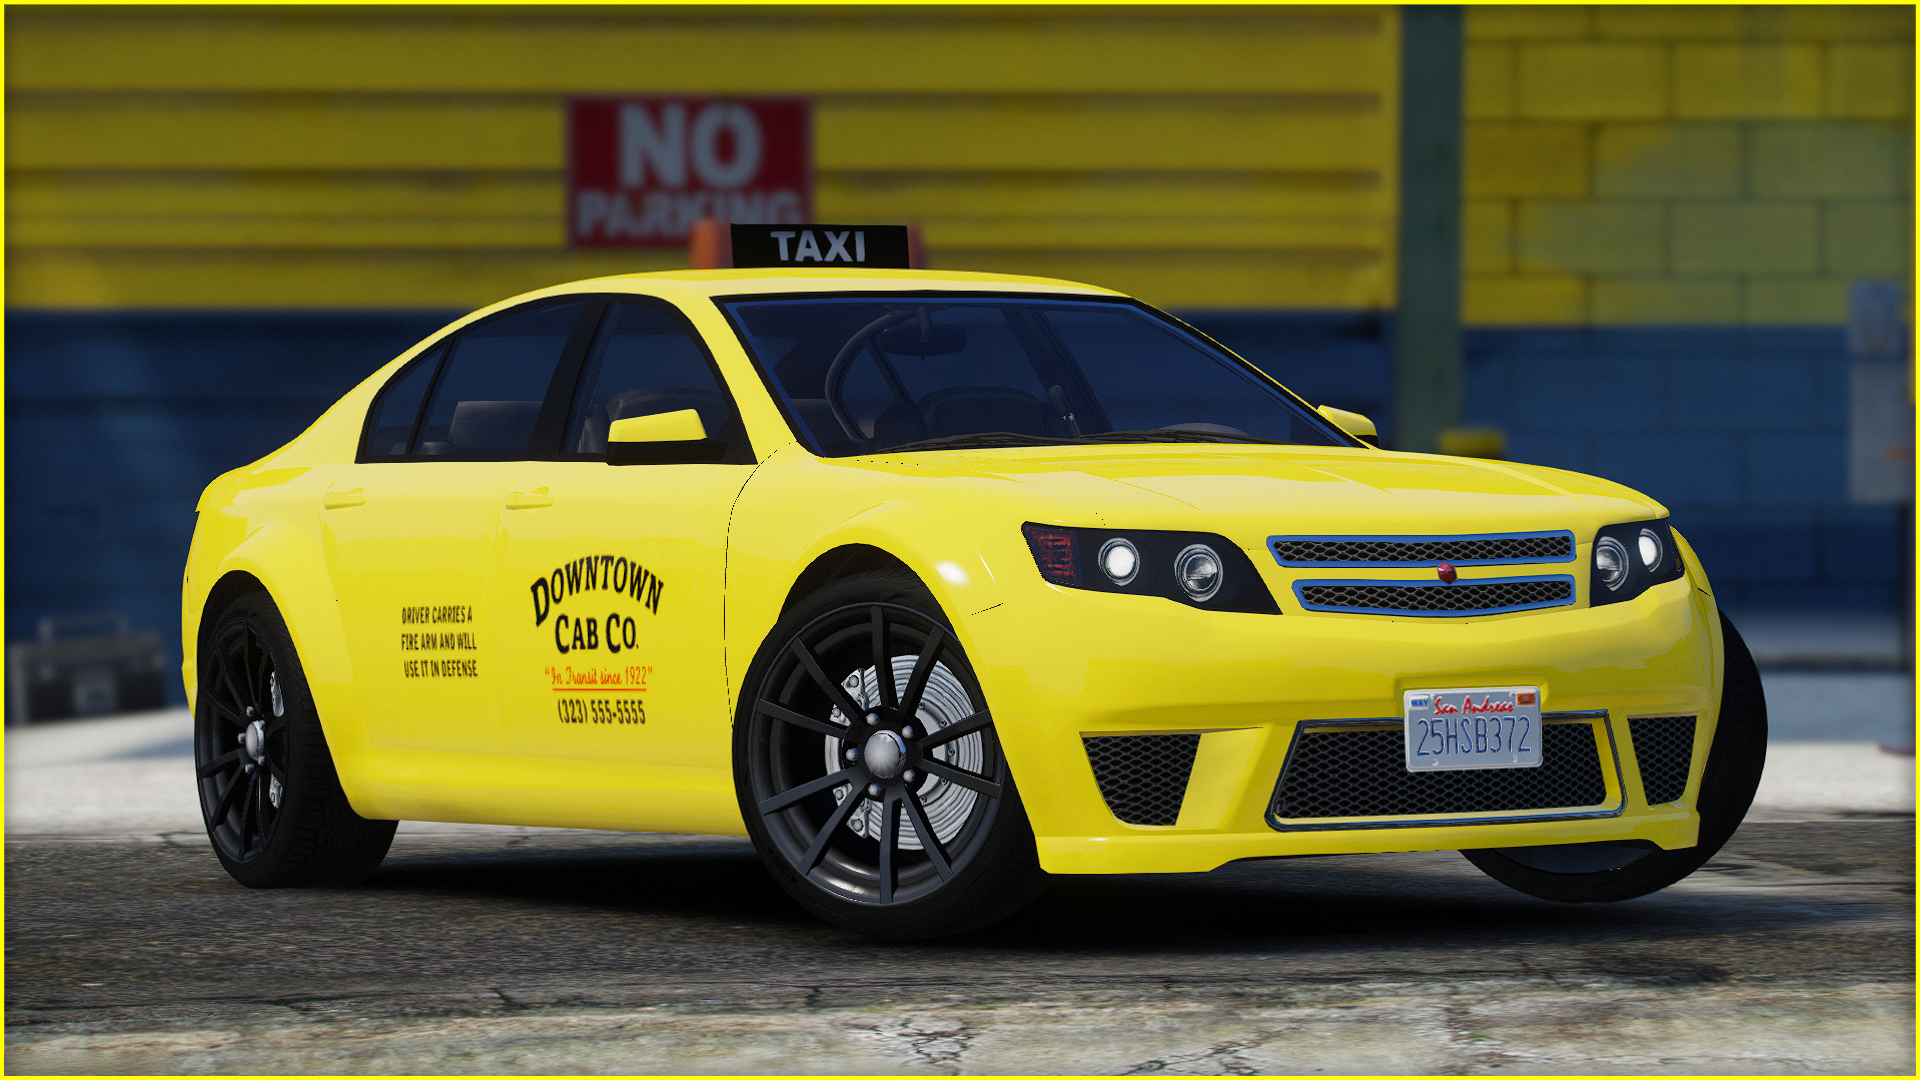 Product image of Taxi Fugitive